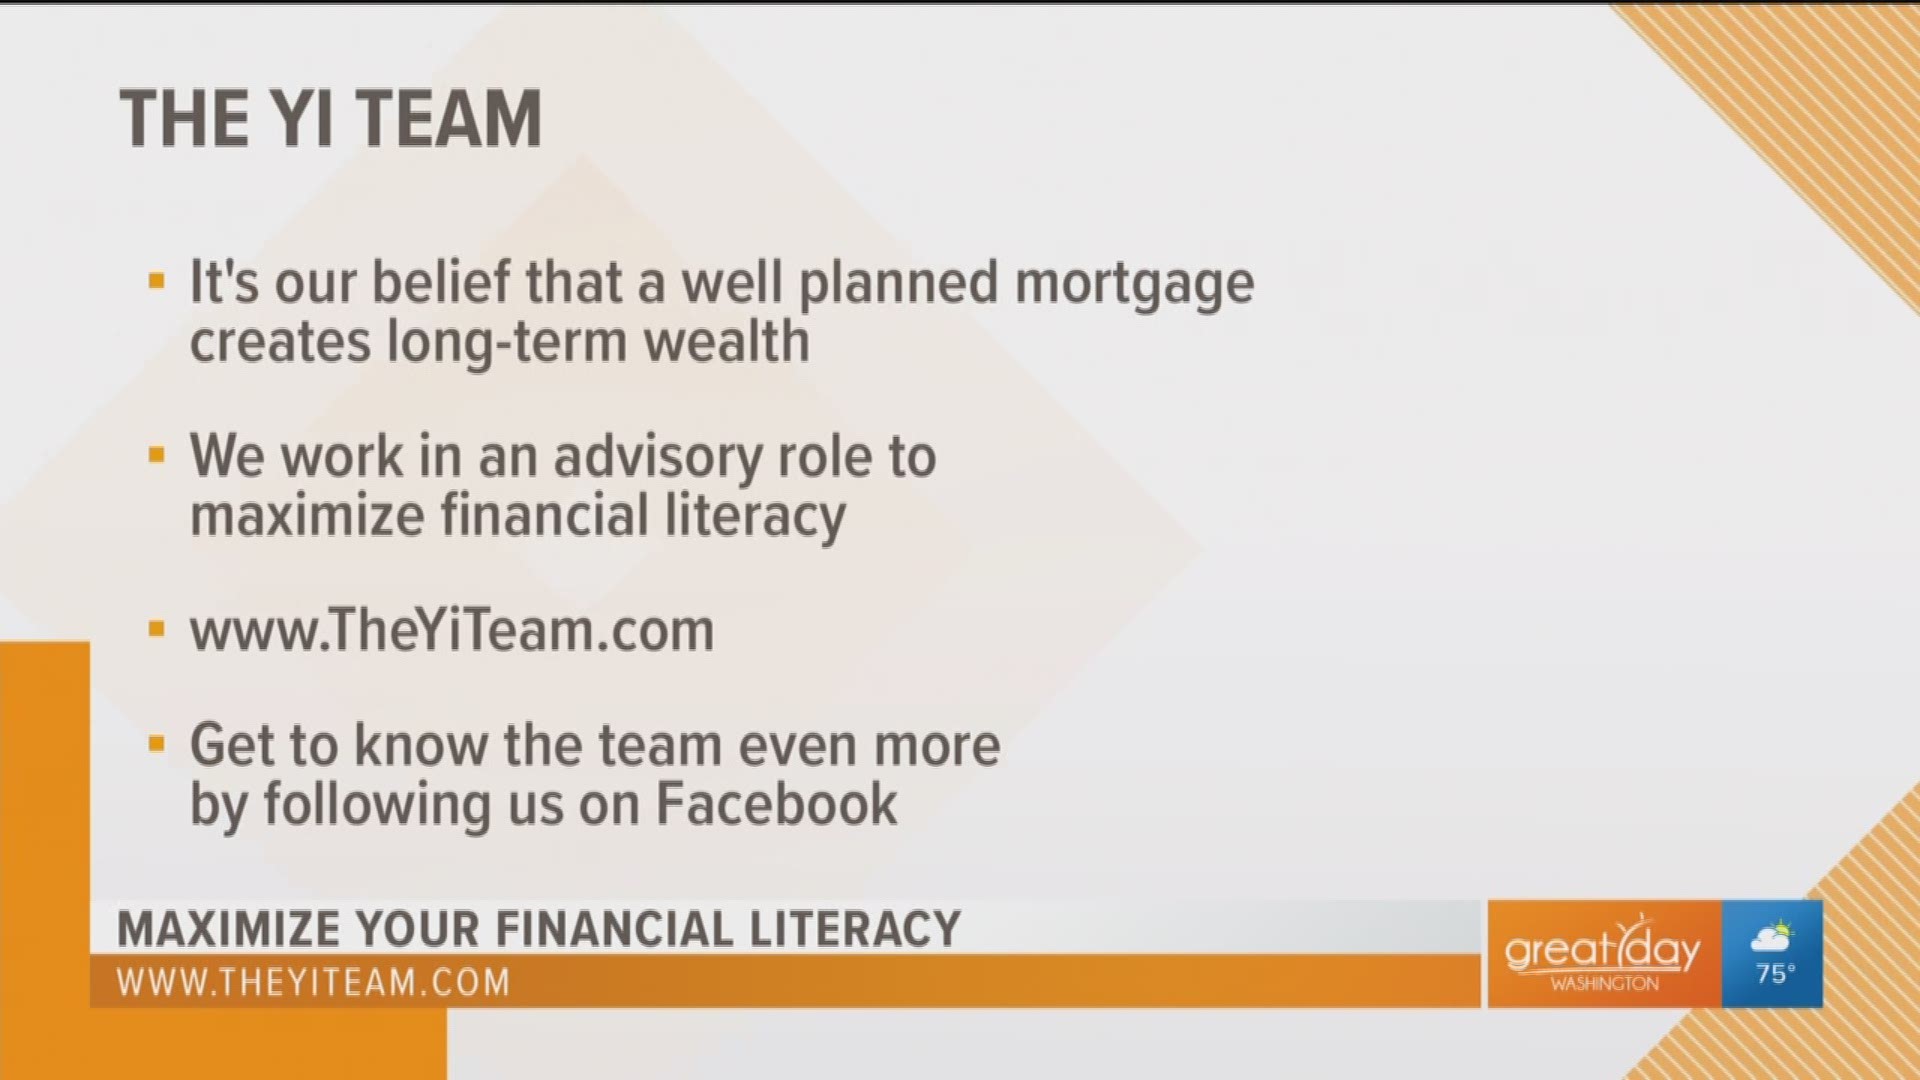 Erin Finke and Derek Harman join Chong Yi to talk about the difference between a loan officer and the mortgage advisors that the Yi Team provides. For more financial advice from the Yi Team, go to www.theyiteam.com.